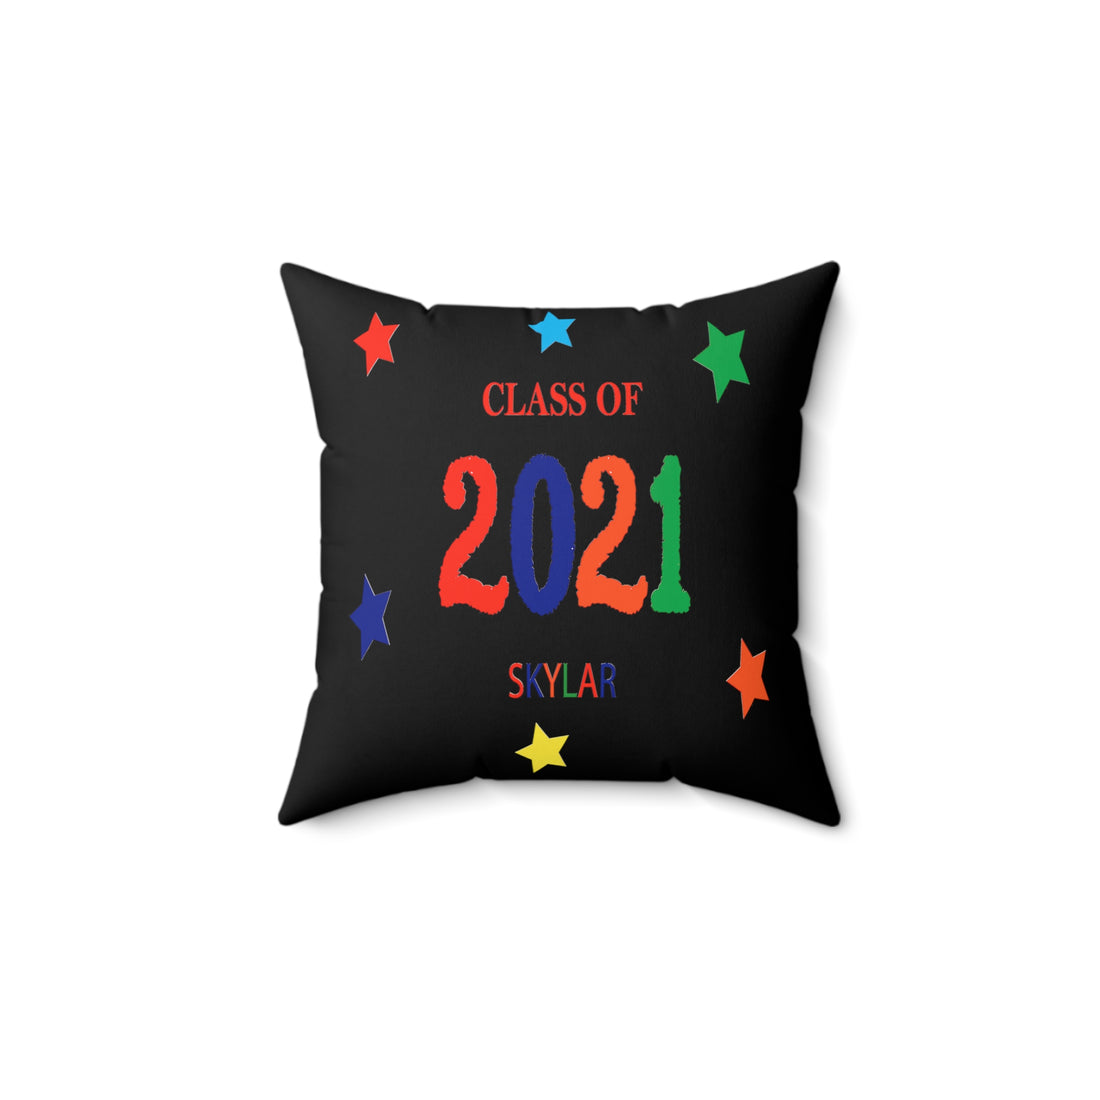 Class of ... with Year &amp; Name Customizable - Black Pillow